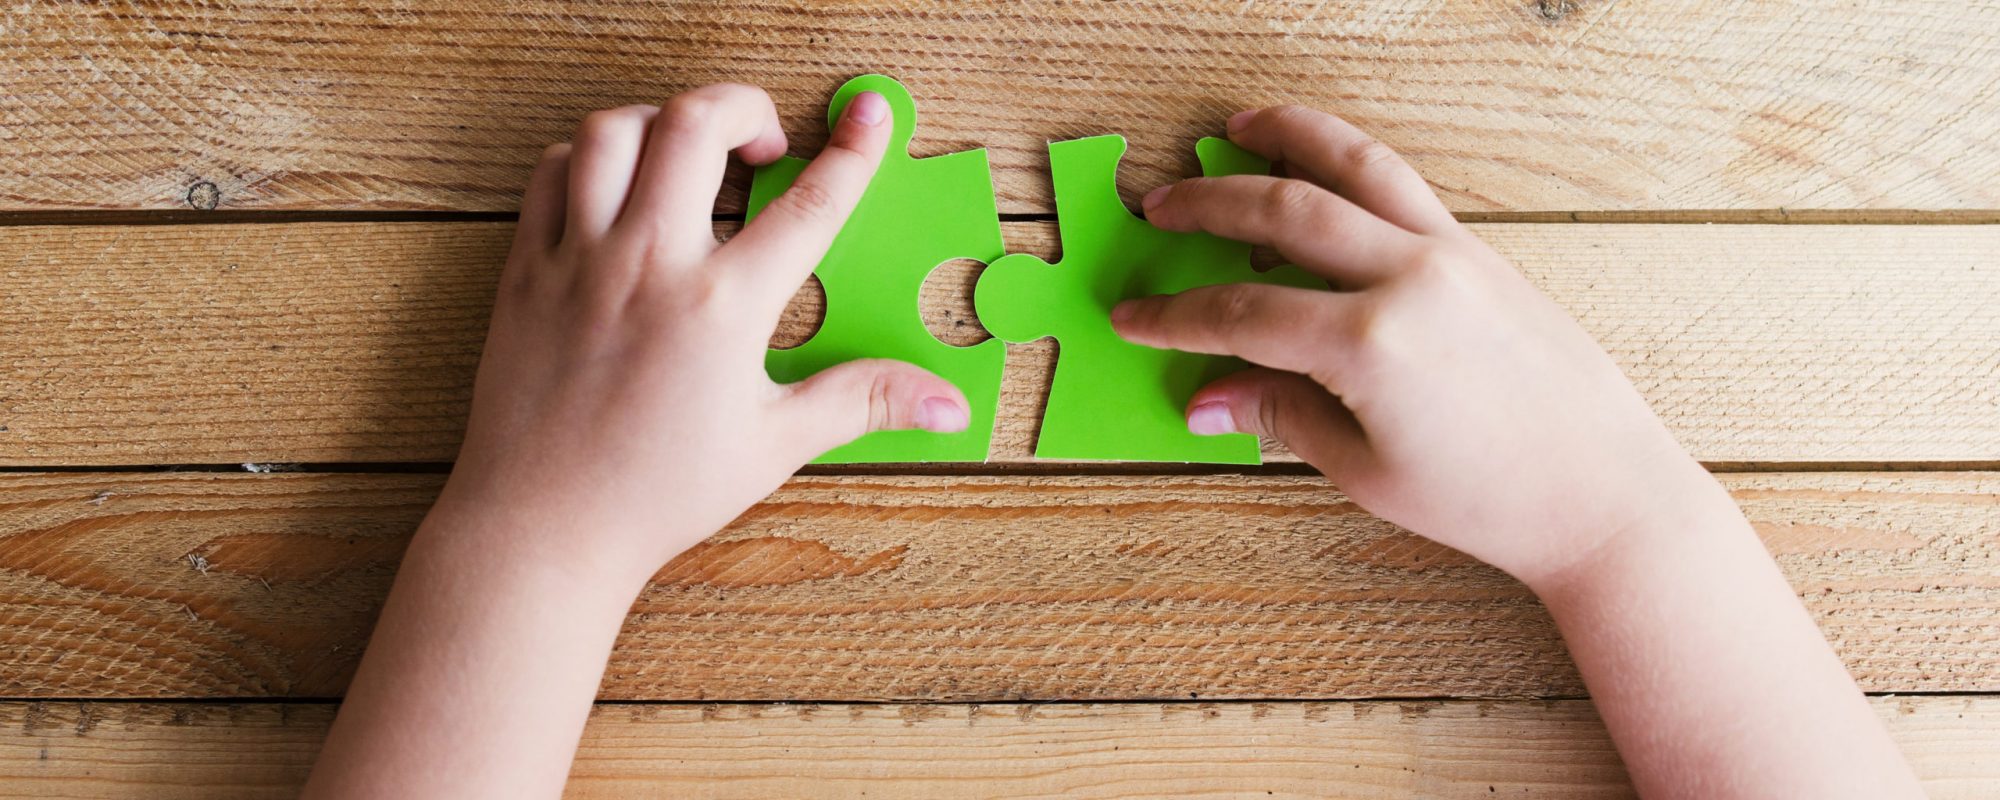 Cropped image of hands connecting two puzzle pieces on wooden table